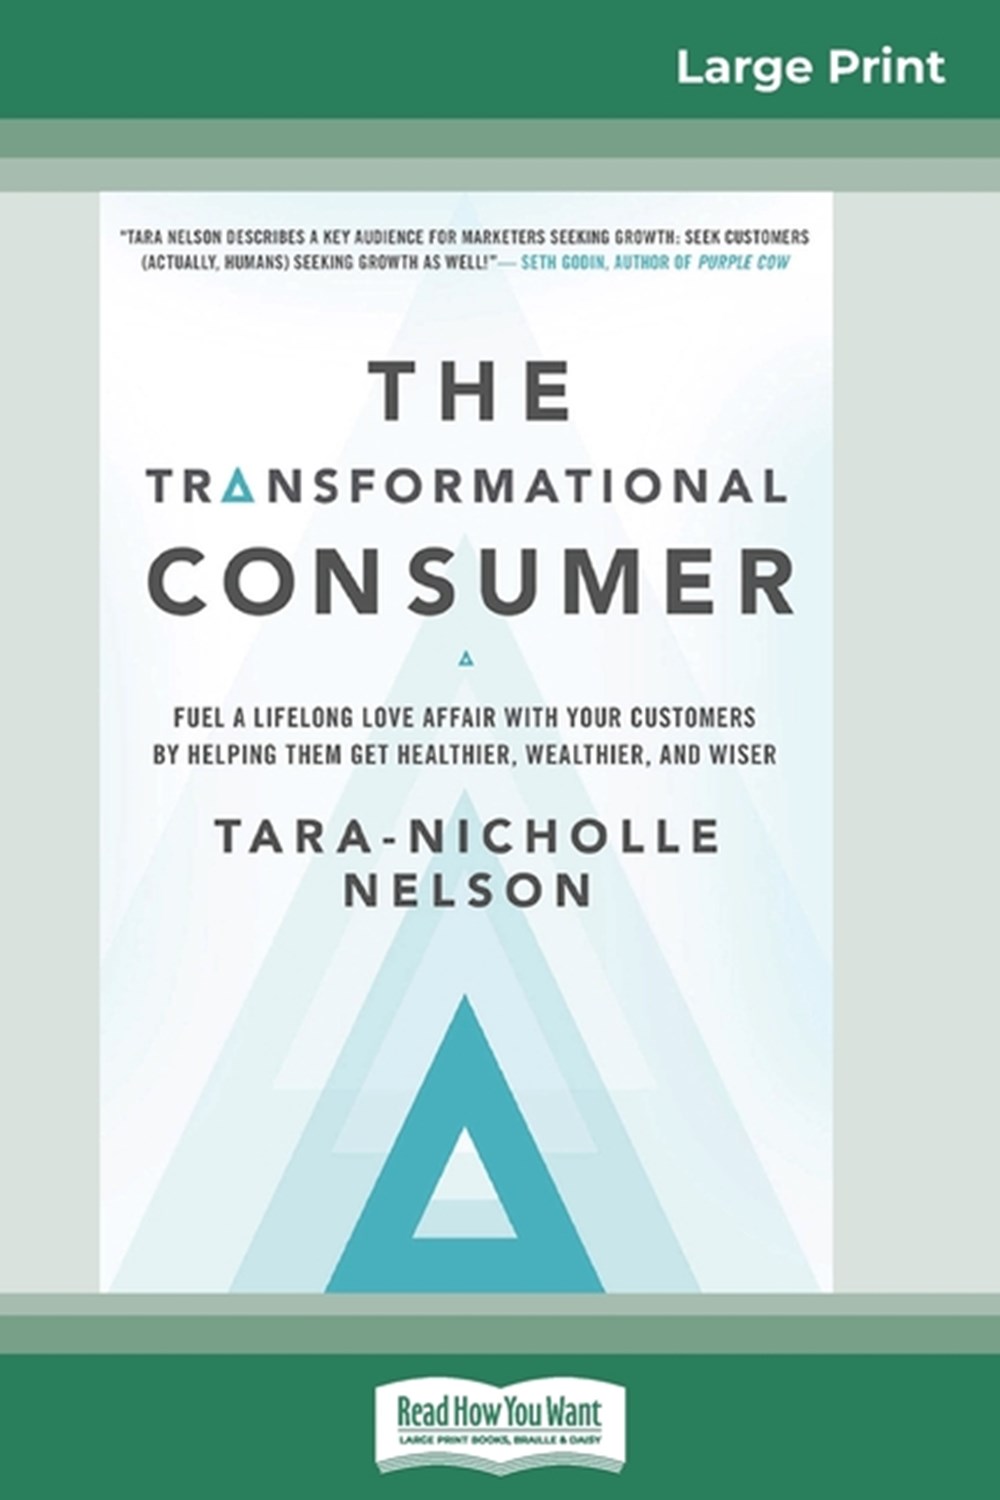 Transformational Consumer Fuel a Lifelong Love Affair with Your Customers by Helping Them Get Health